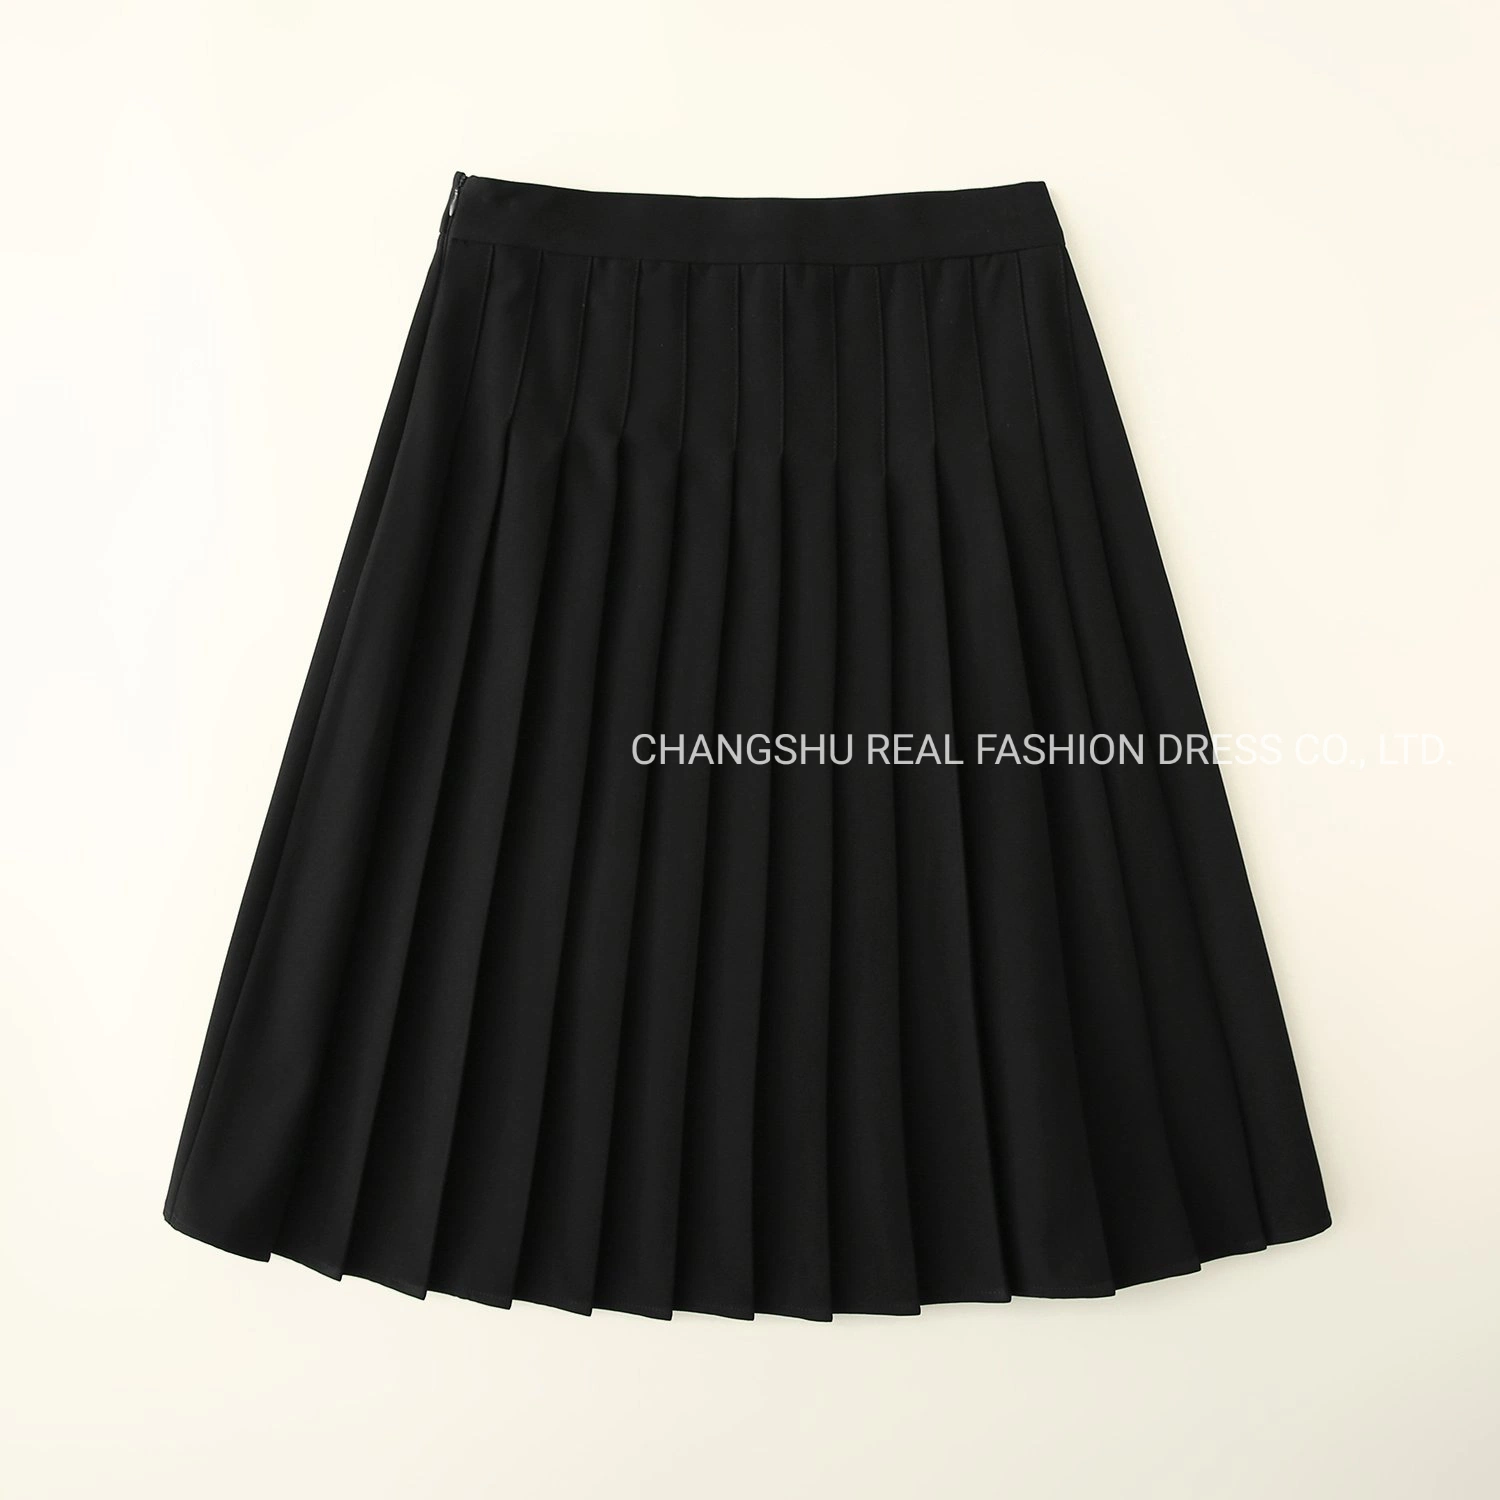 Children Clothing Girl Toddle Kids Fashion Black Woven Pleat Skirt Wear with Invisible Zipper at Side Seam